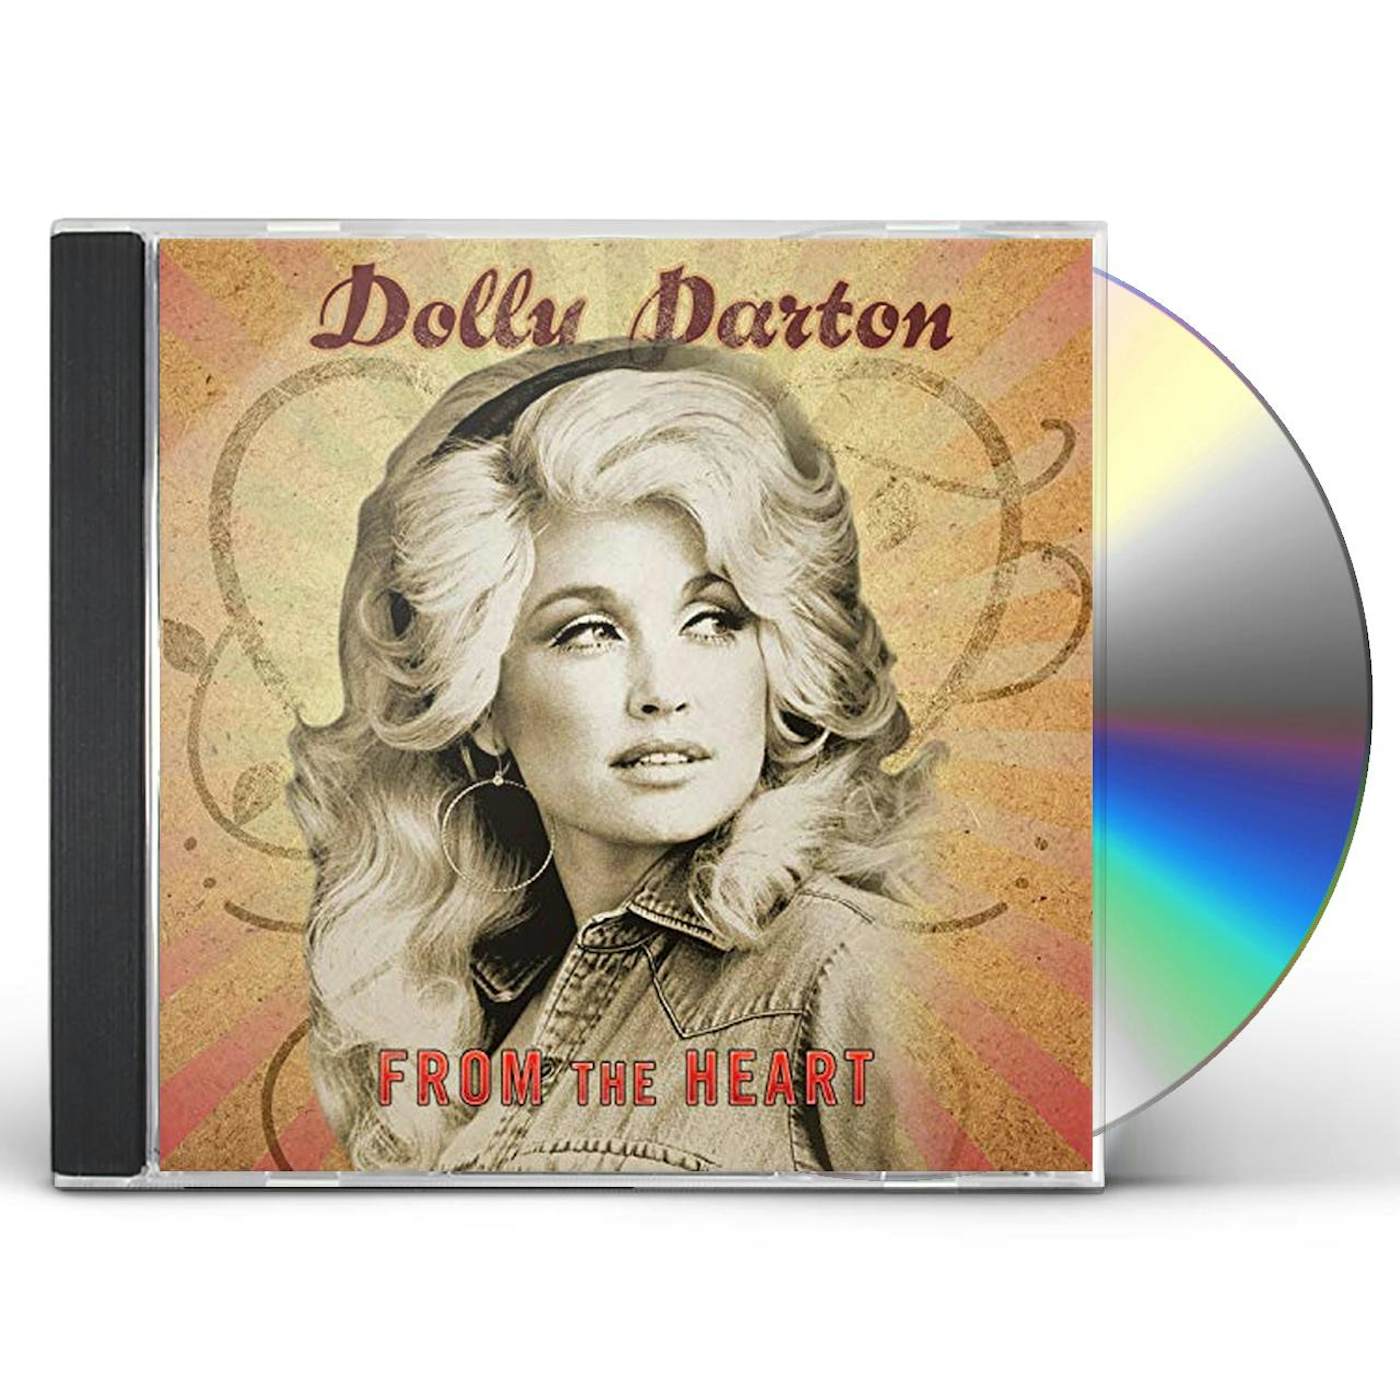 Dolly Parton FROM THE HEART CD